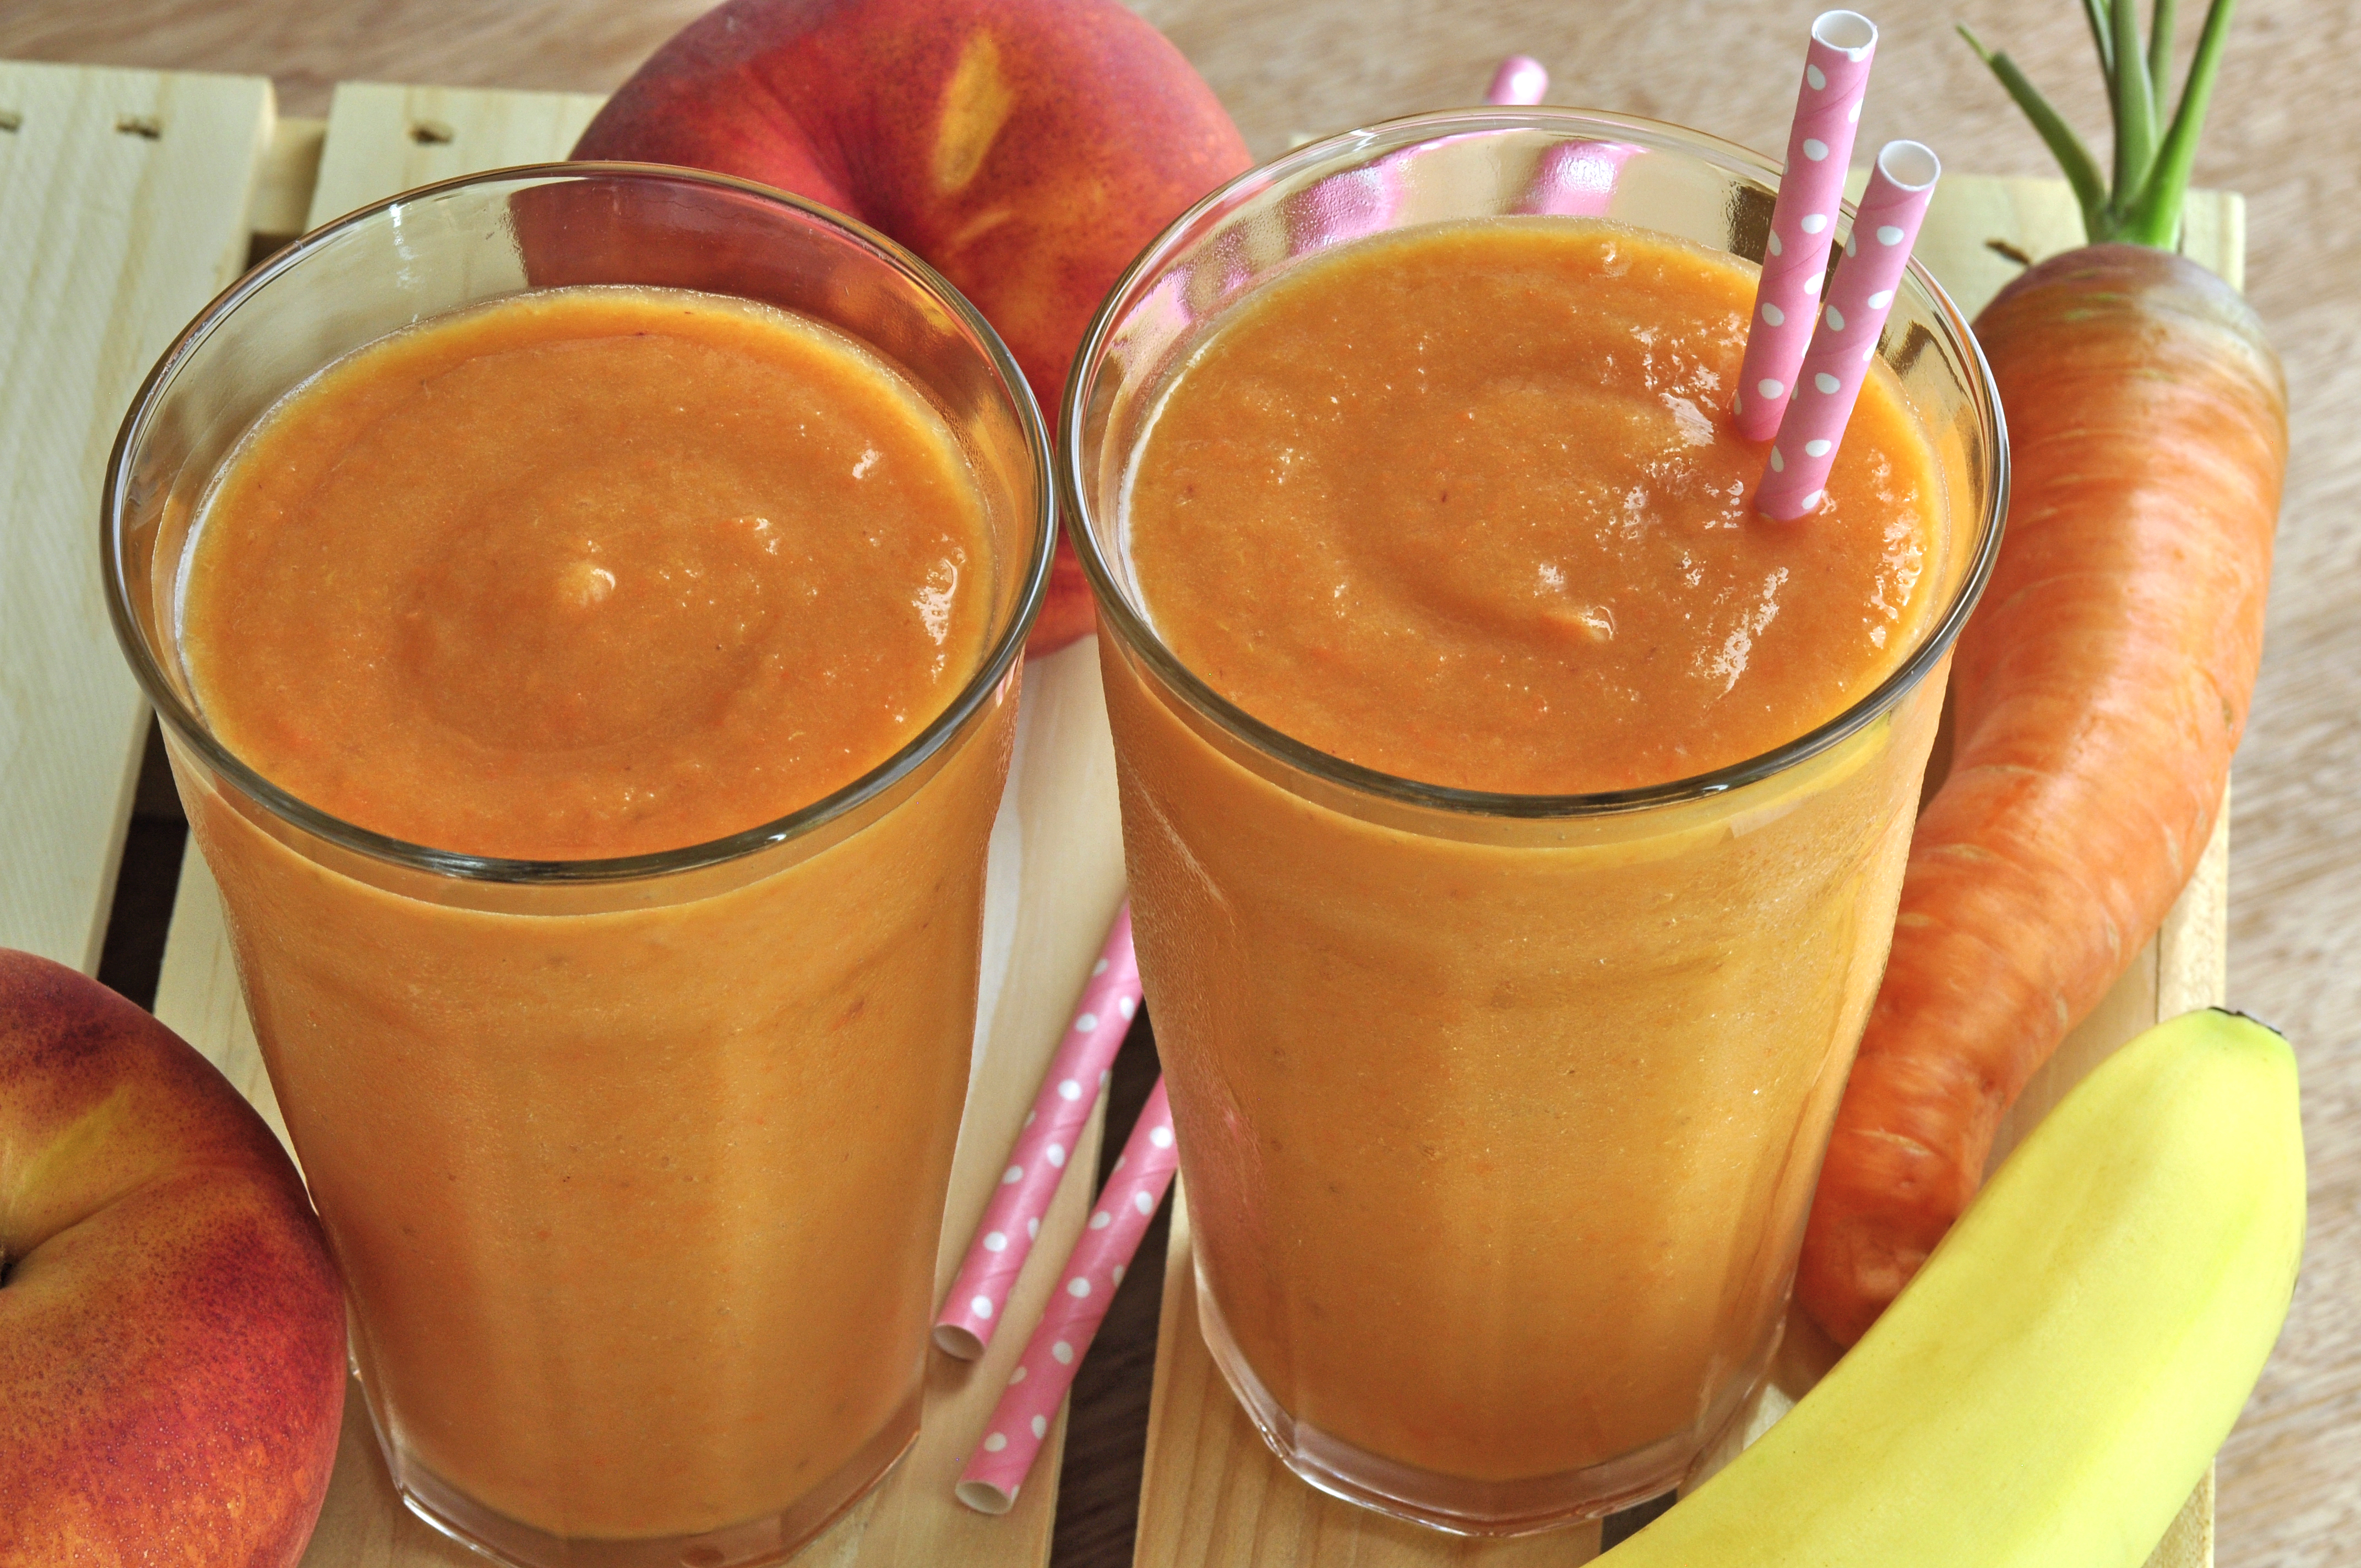 Peach and Carrot Smoothie in glasses on table